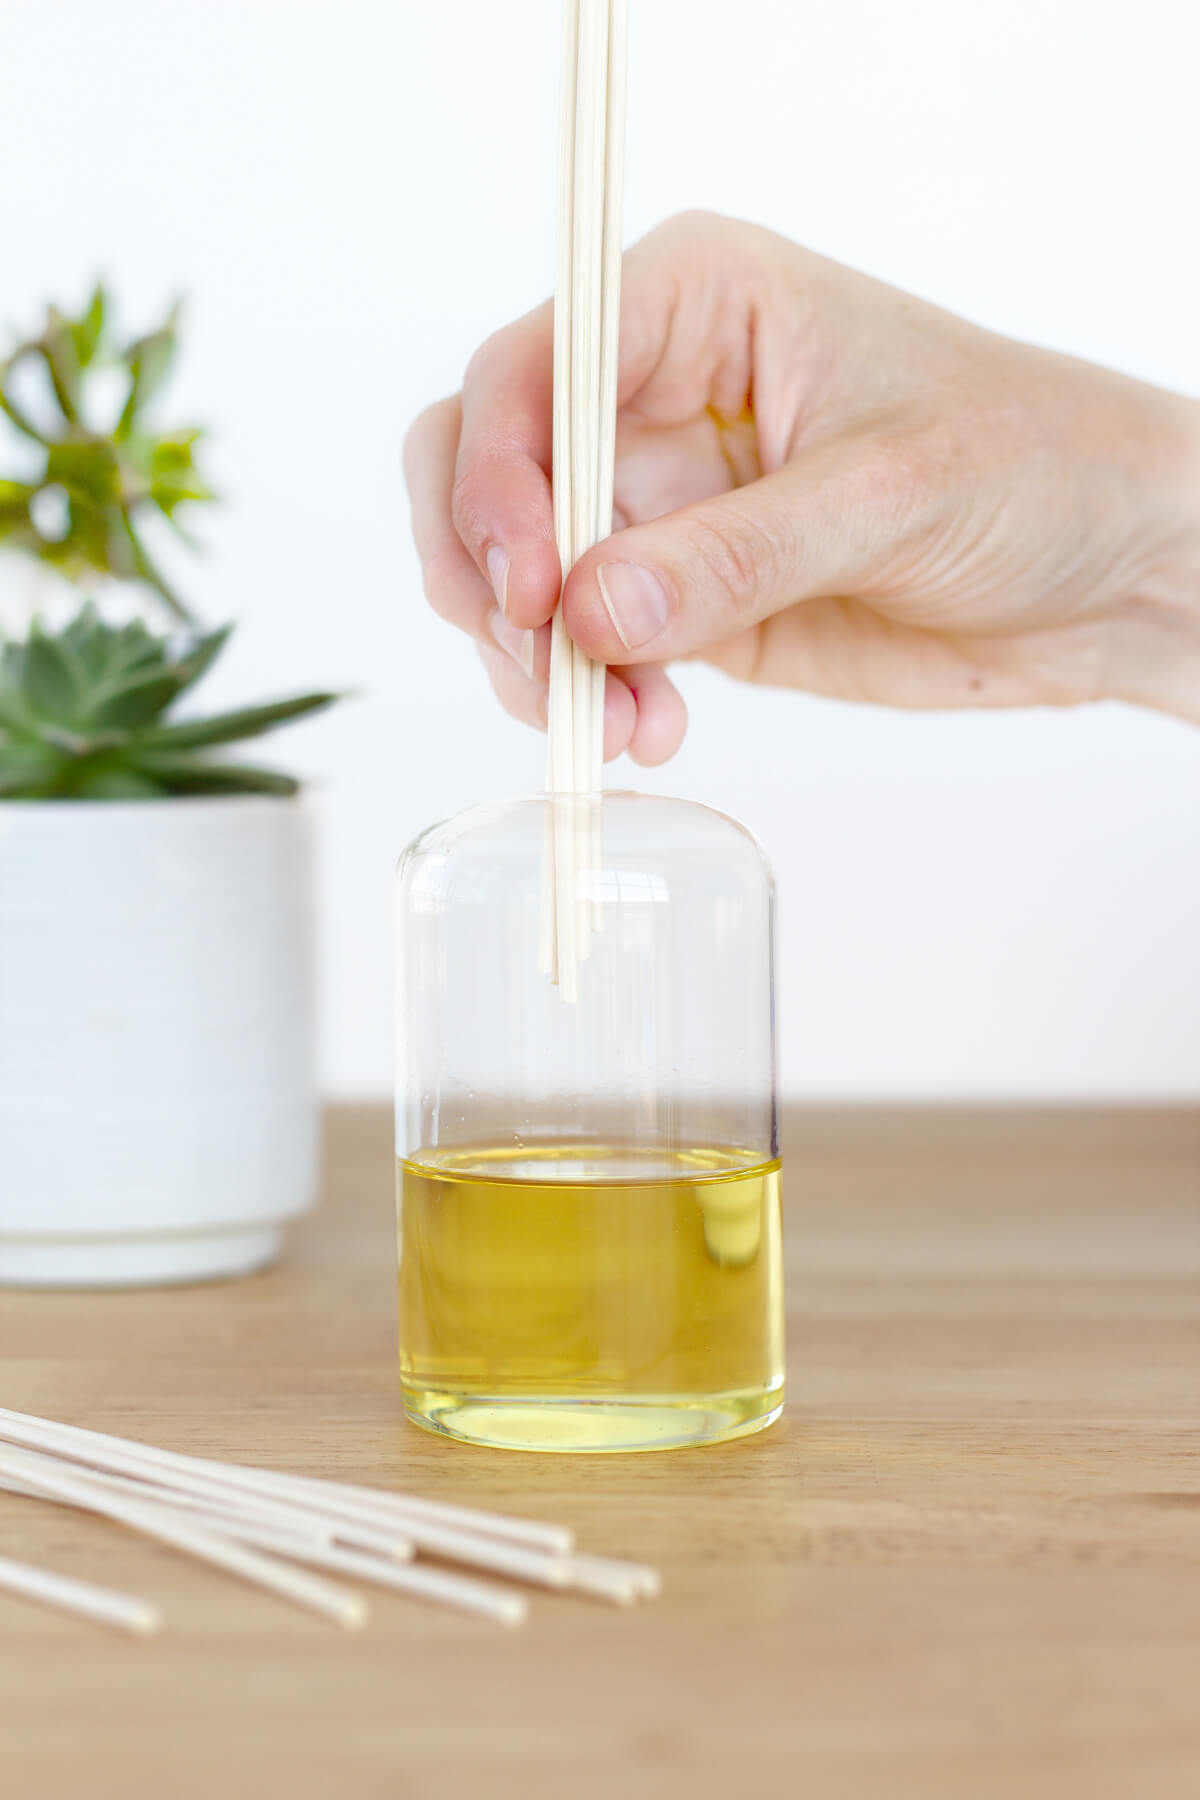 Learn how to make your own reed diffuser using essential oils. They are easy to make + cost a fraction of the price of diffusers sold in high-end retailers. Get this DIY and other great projects or delicious recipes at www.designsofanykind.com